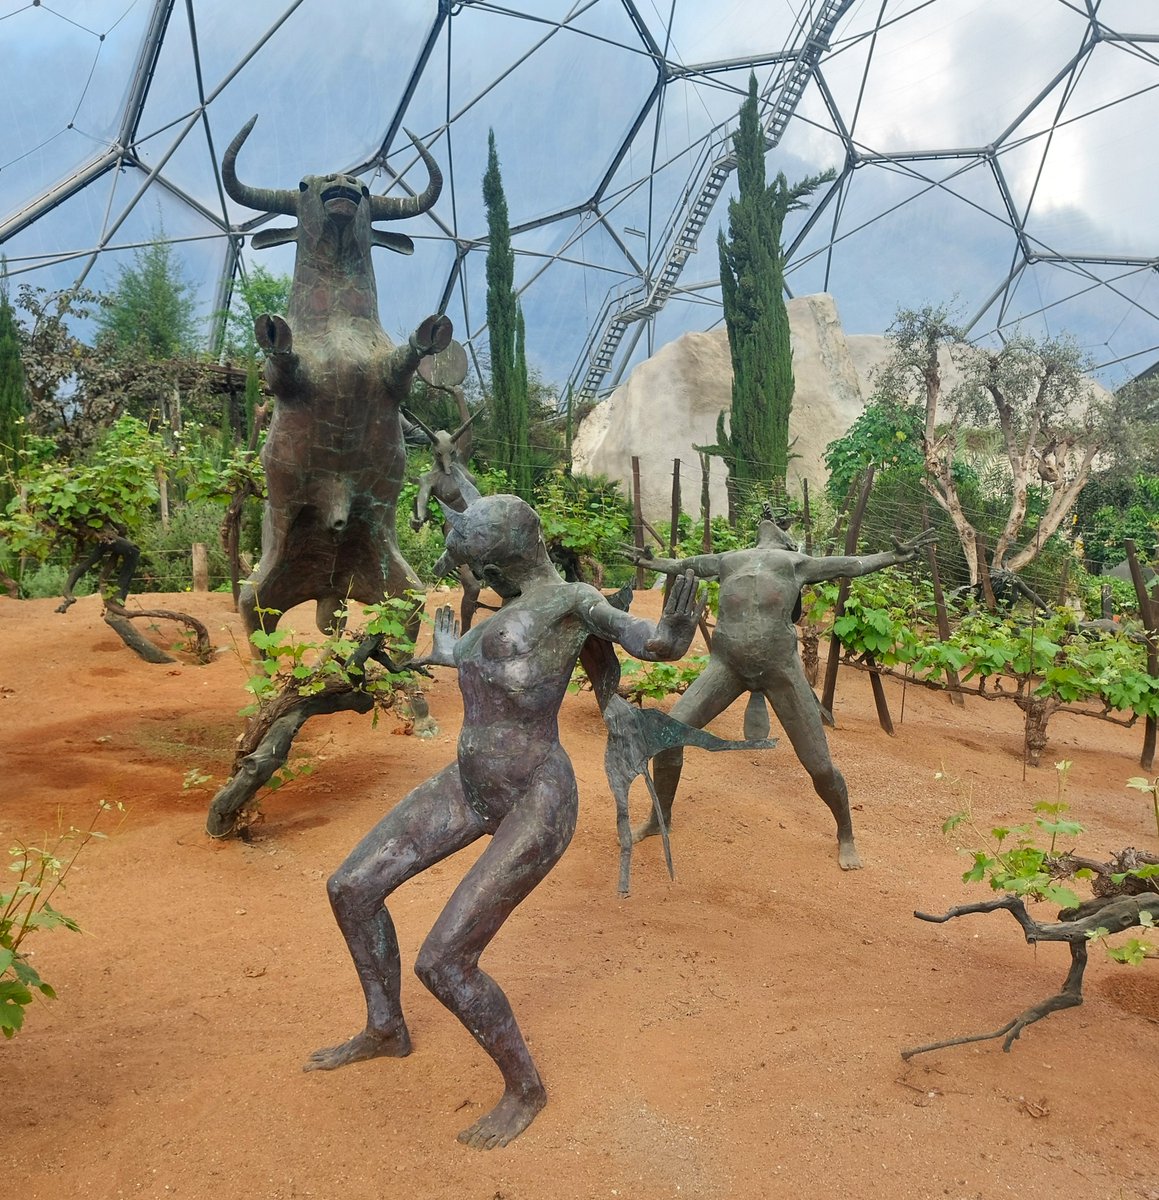 #AllMetalMonday #MythologyMonday In Cornwall's Eden Project, Dionysus - the personification of nature in its untamed state - gathers w his followers the Maenads to dance and writhe amongst the grapevines. Tim Shaw's sculptures of Bacchanalian revels are wild, mad, fantastic.